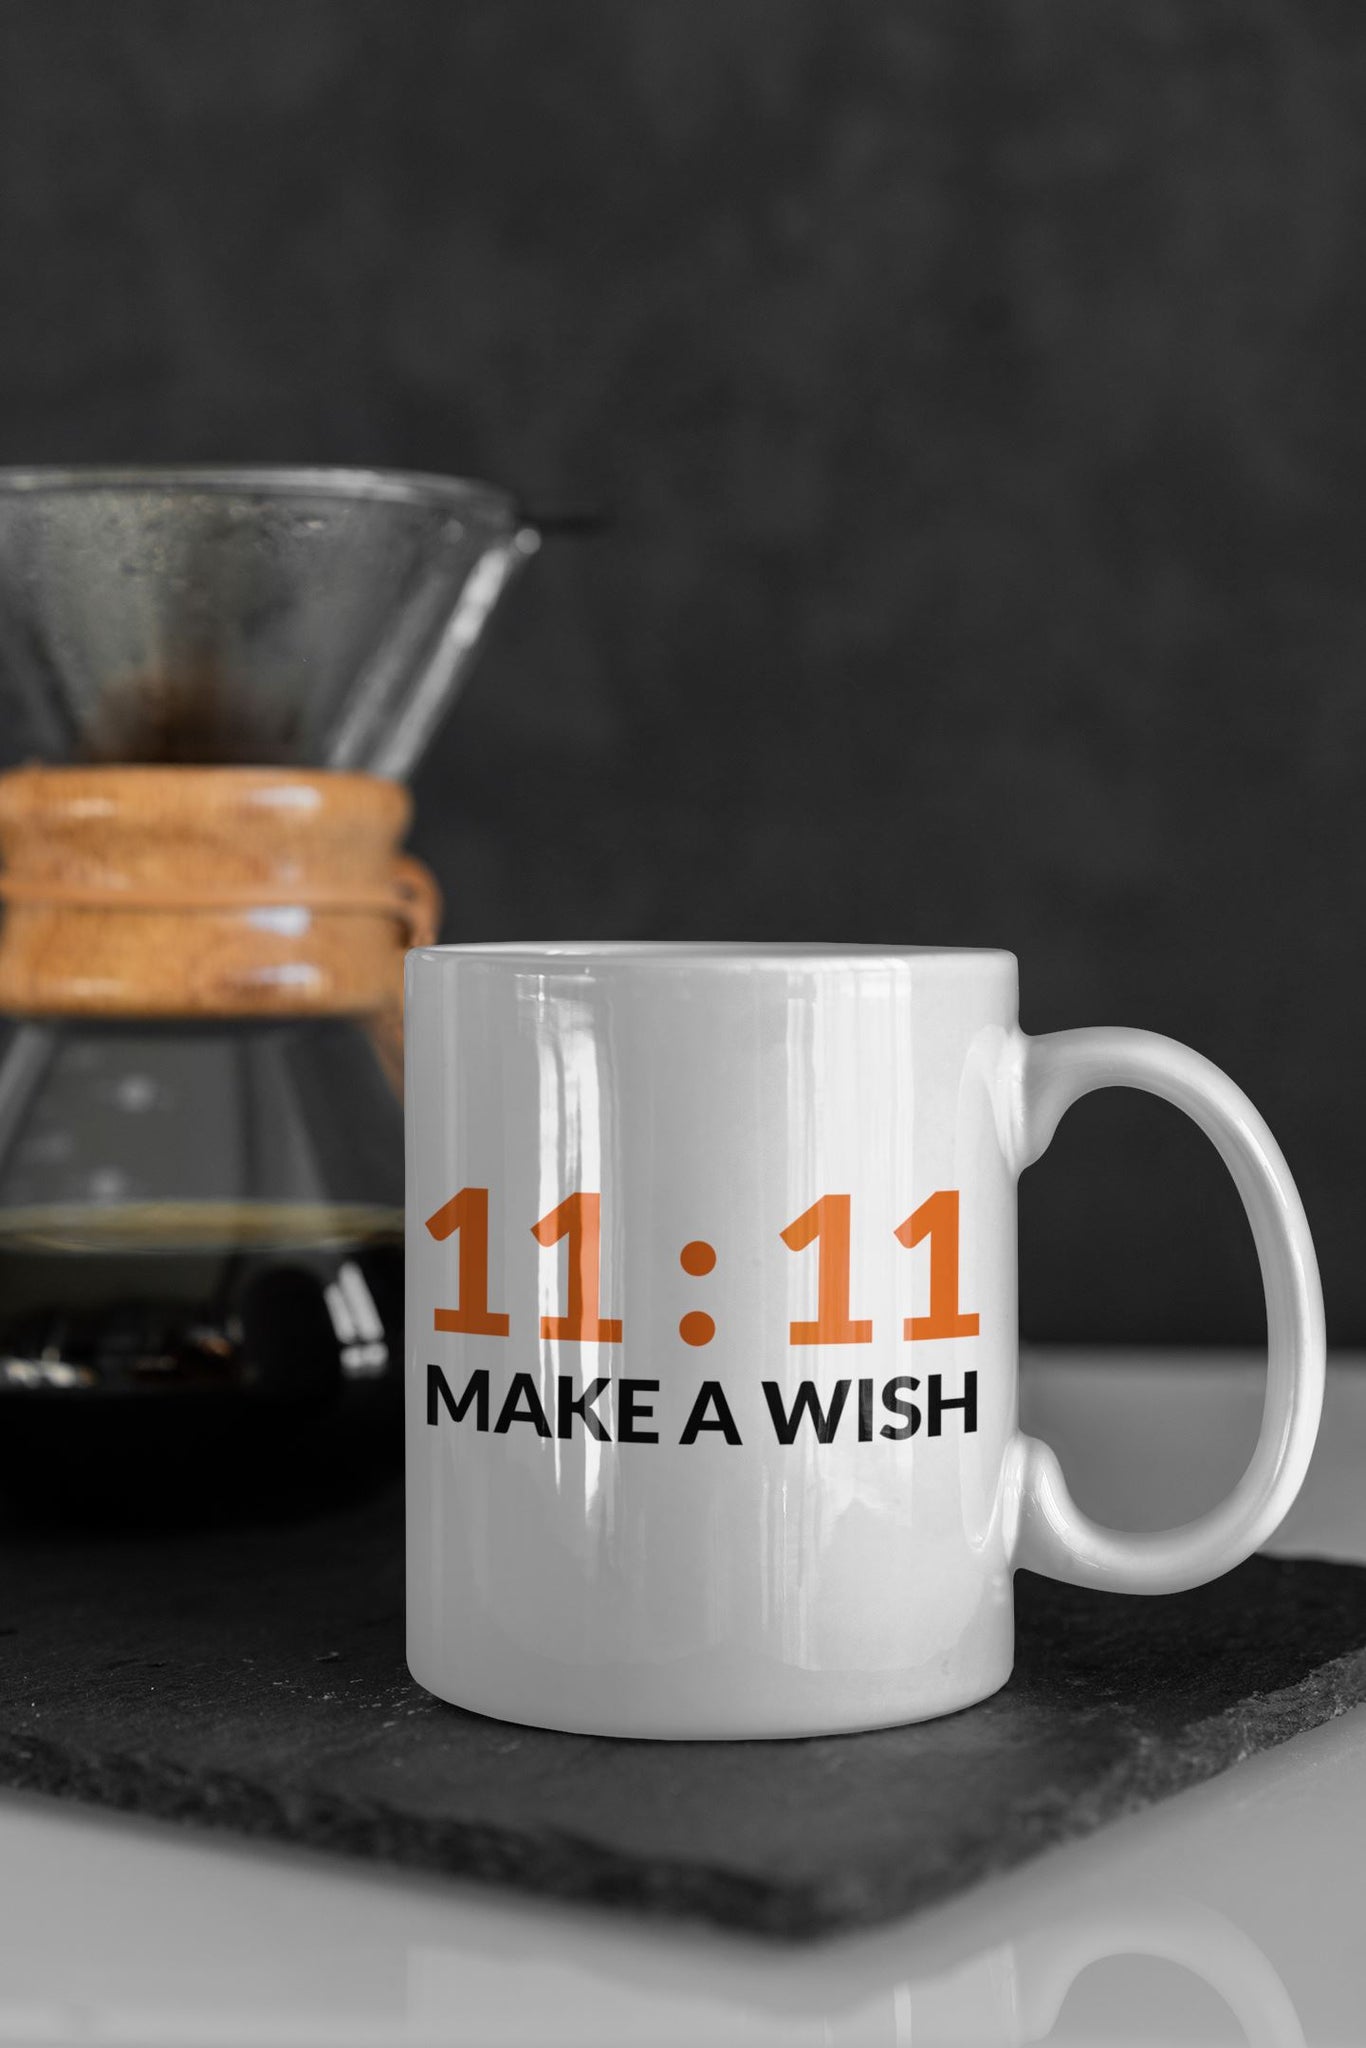 11:11 Make a Wish Exclusive Colour Changing Mug for Good Luck Printrove 